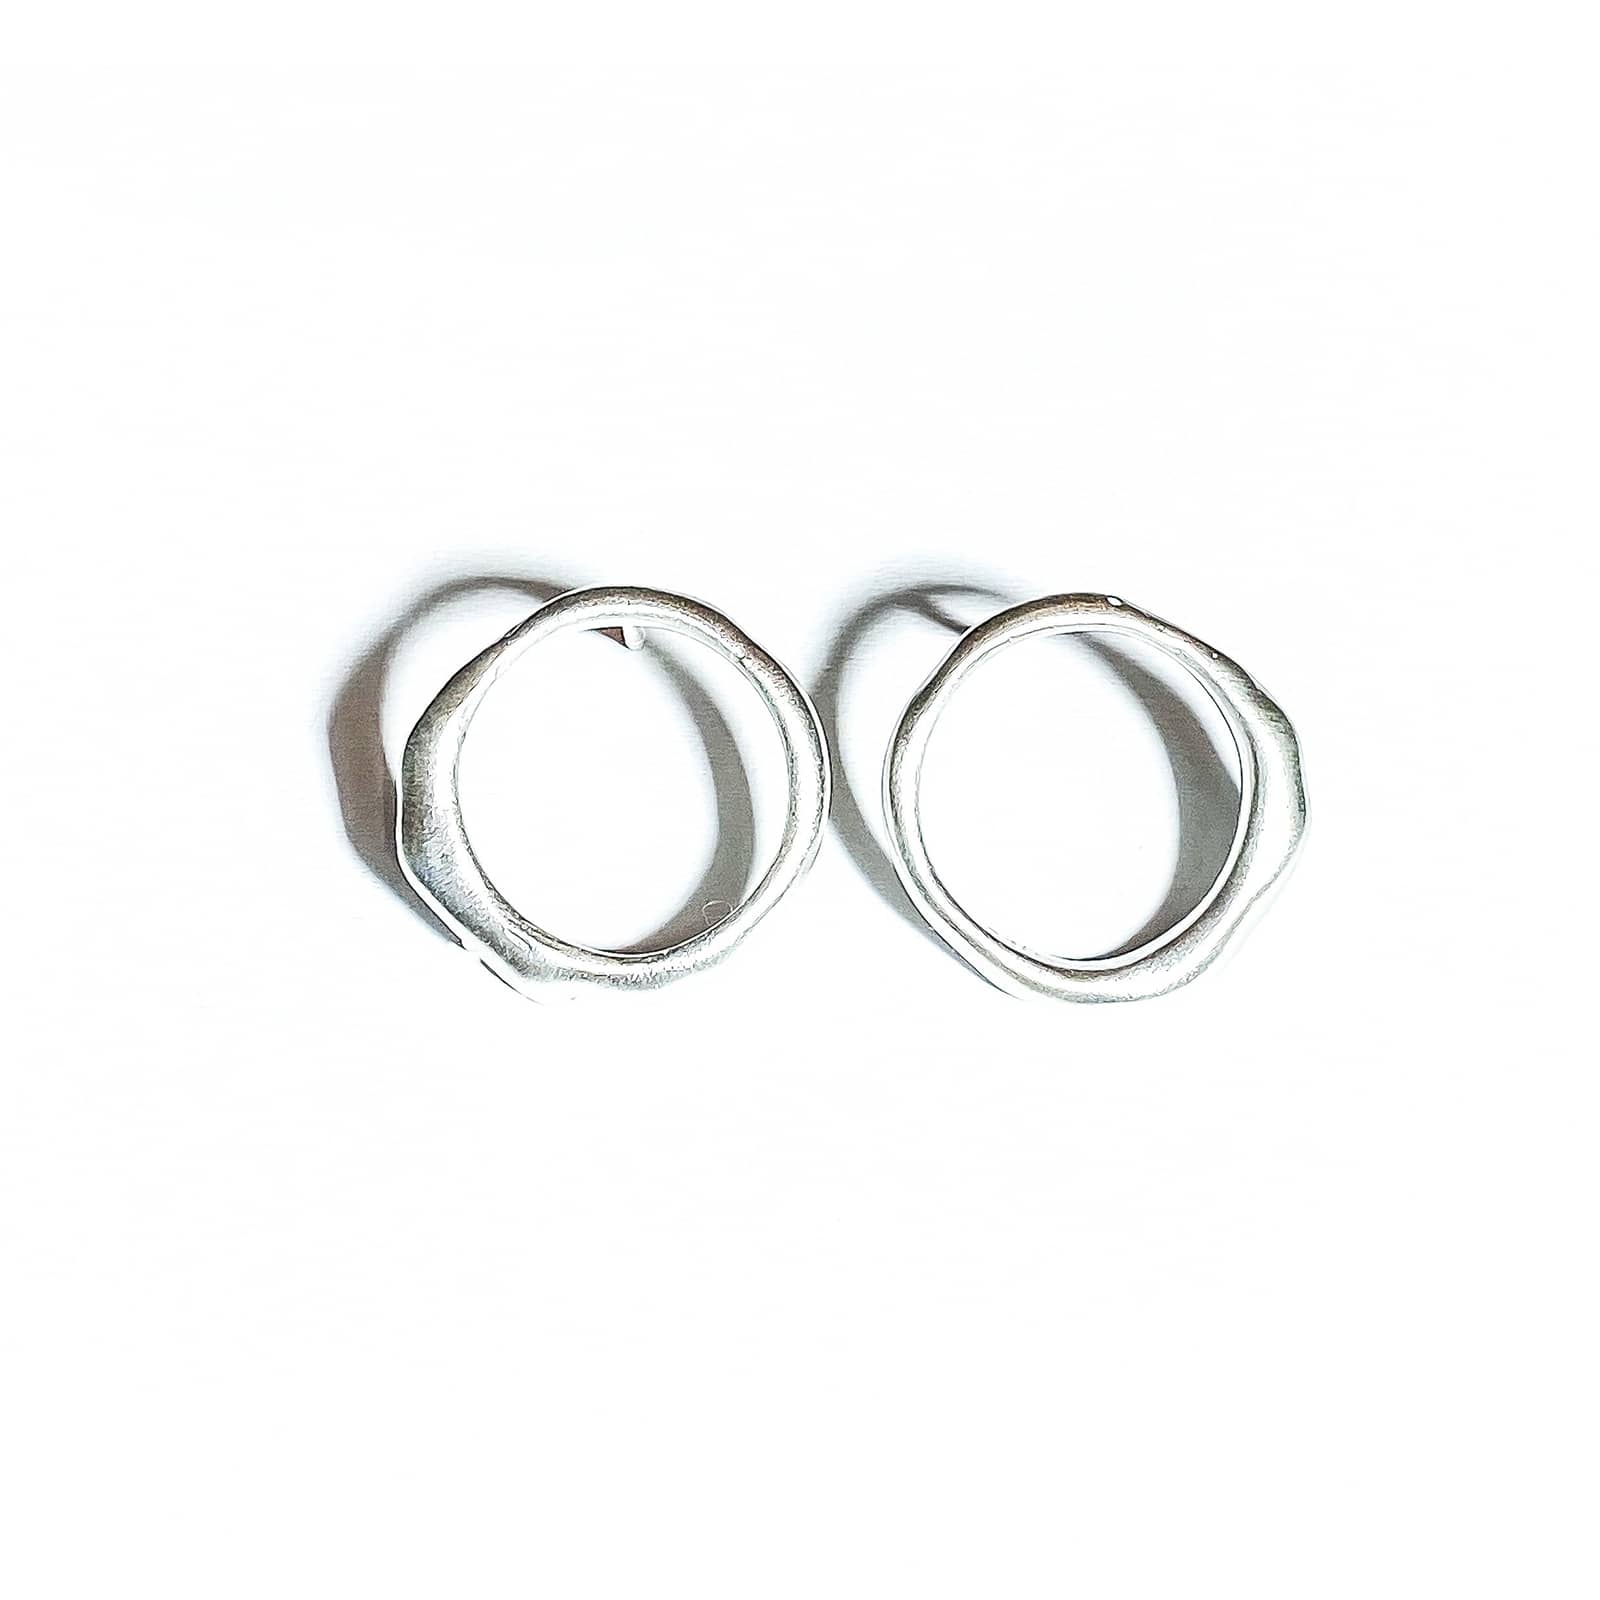 Curves Collection small silver earrings.